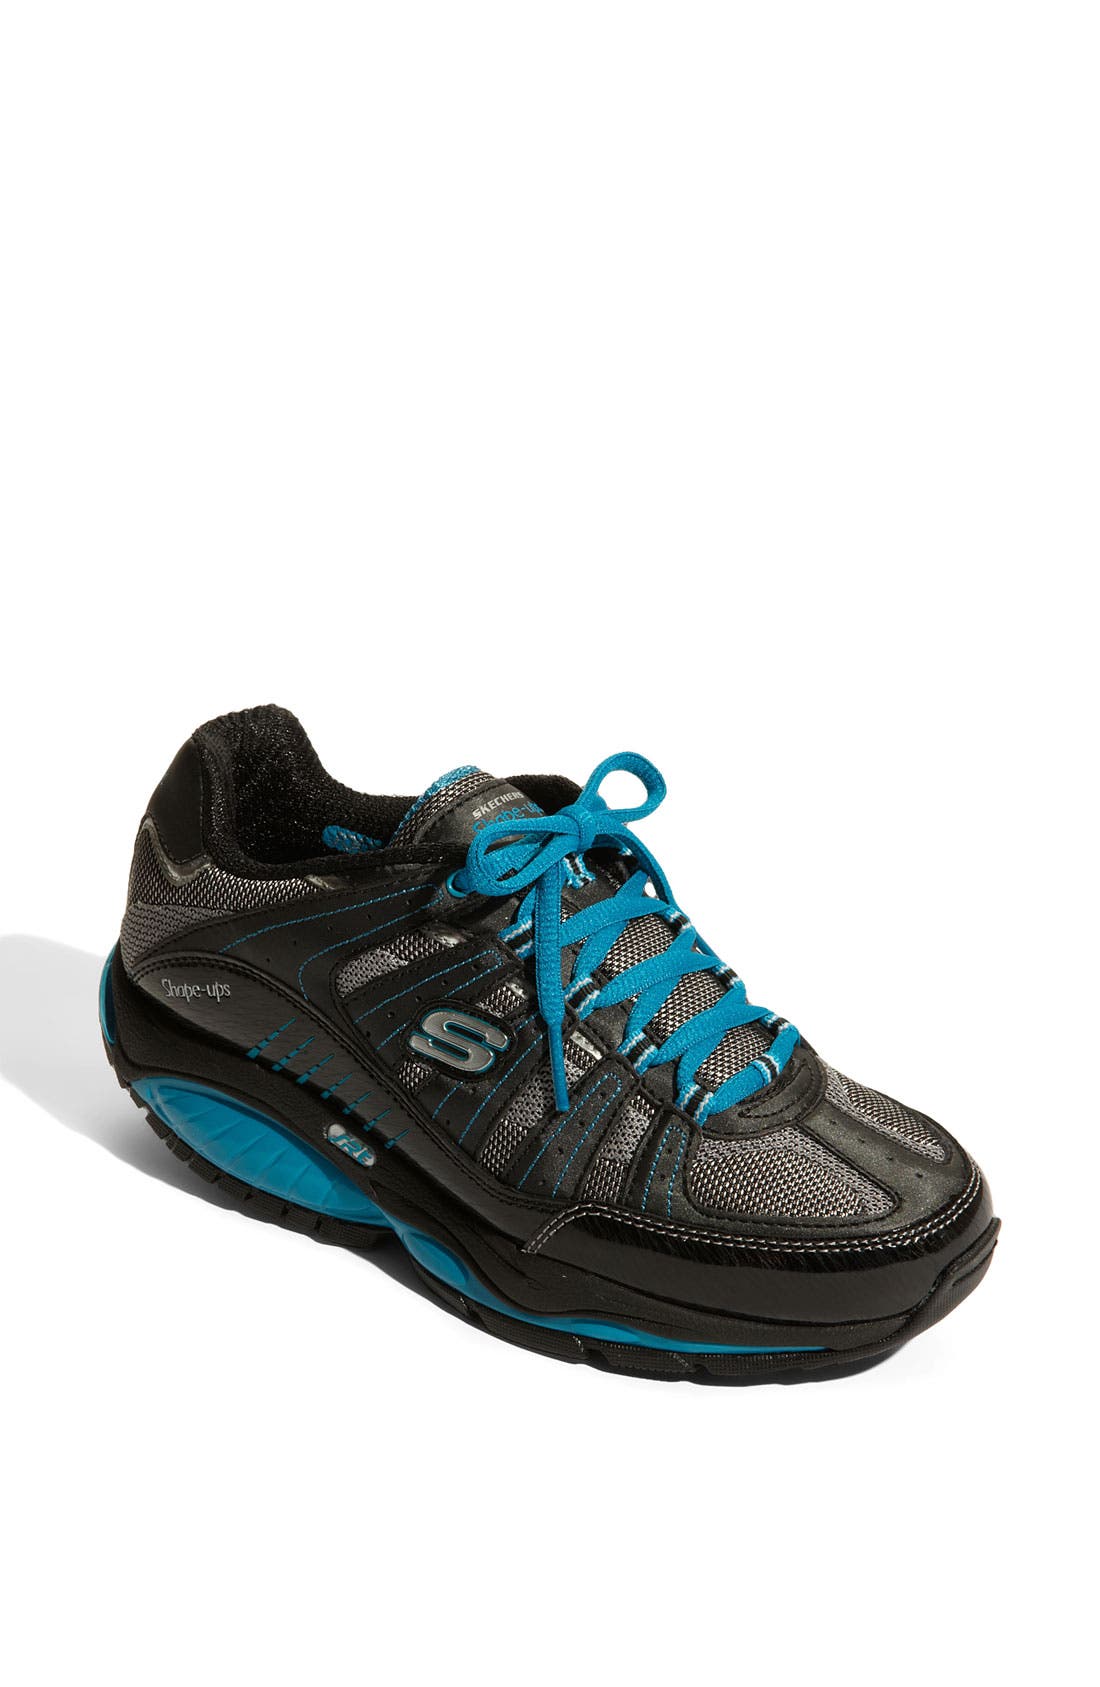 skechers shape up shoes recall